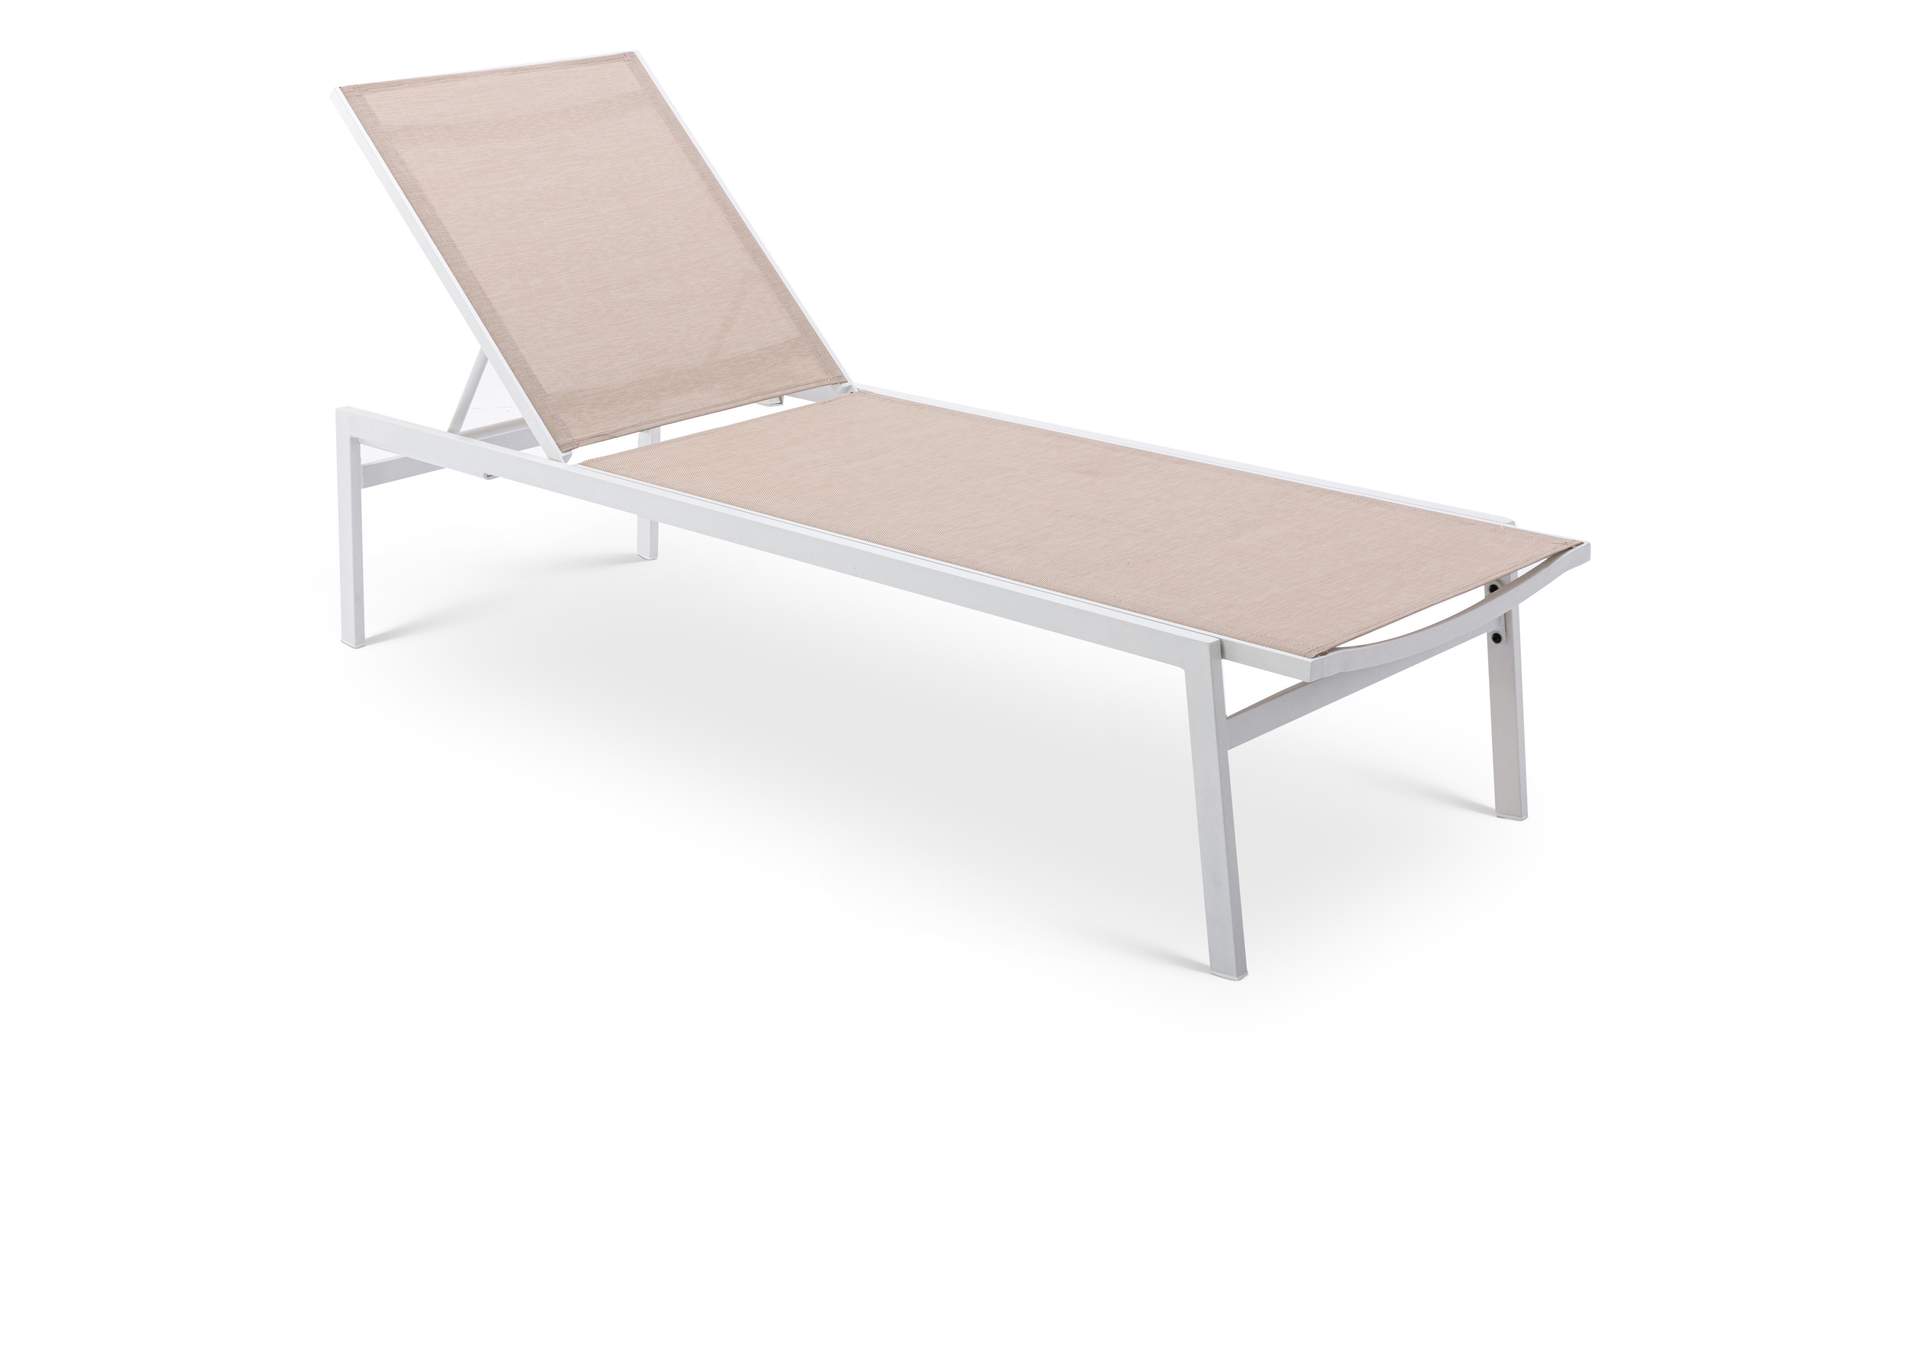 Santorini Beige Resilient Mesh Water Resistant Fabric Outdoor Patio Aluminum Mesh Chaise Lounge Chair,Meridian Furniture